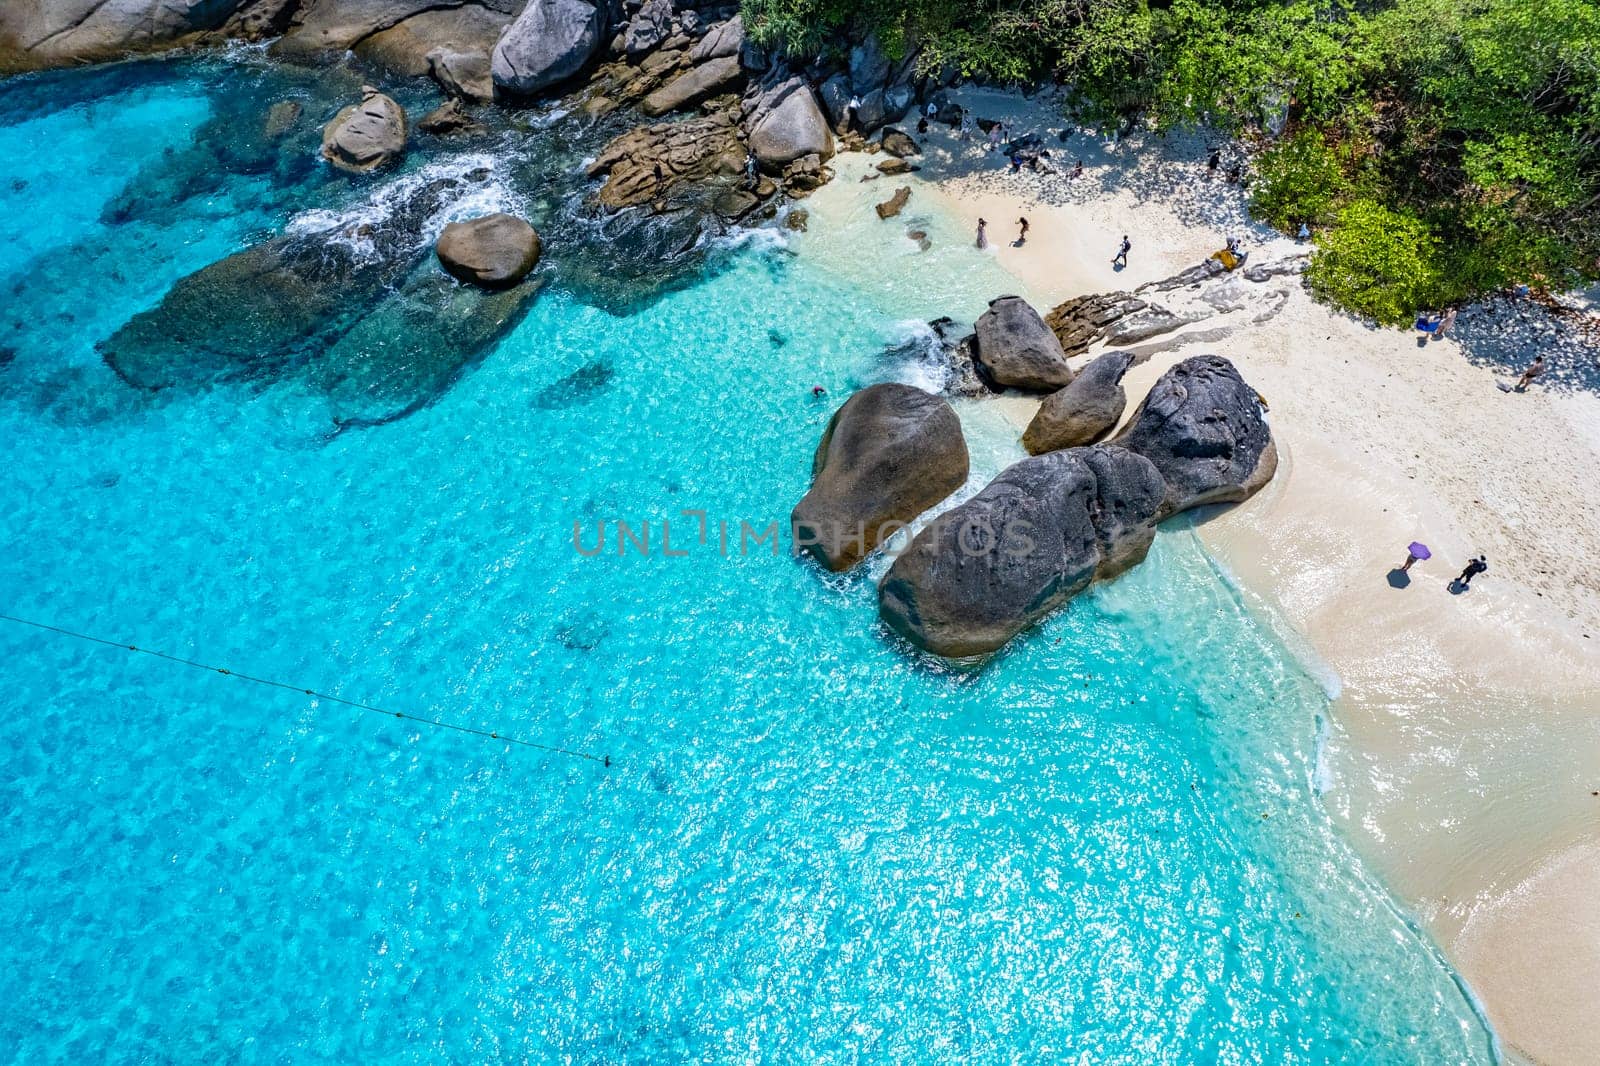 Aerial view of Similan island in Phang Nga, Thailand, south east asia